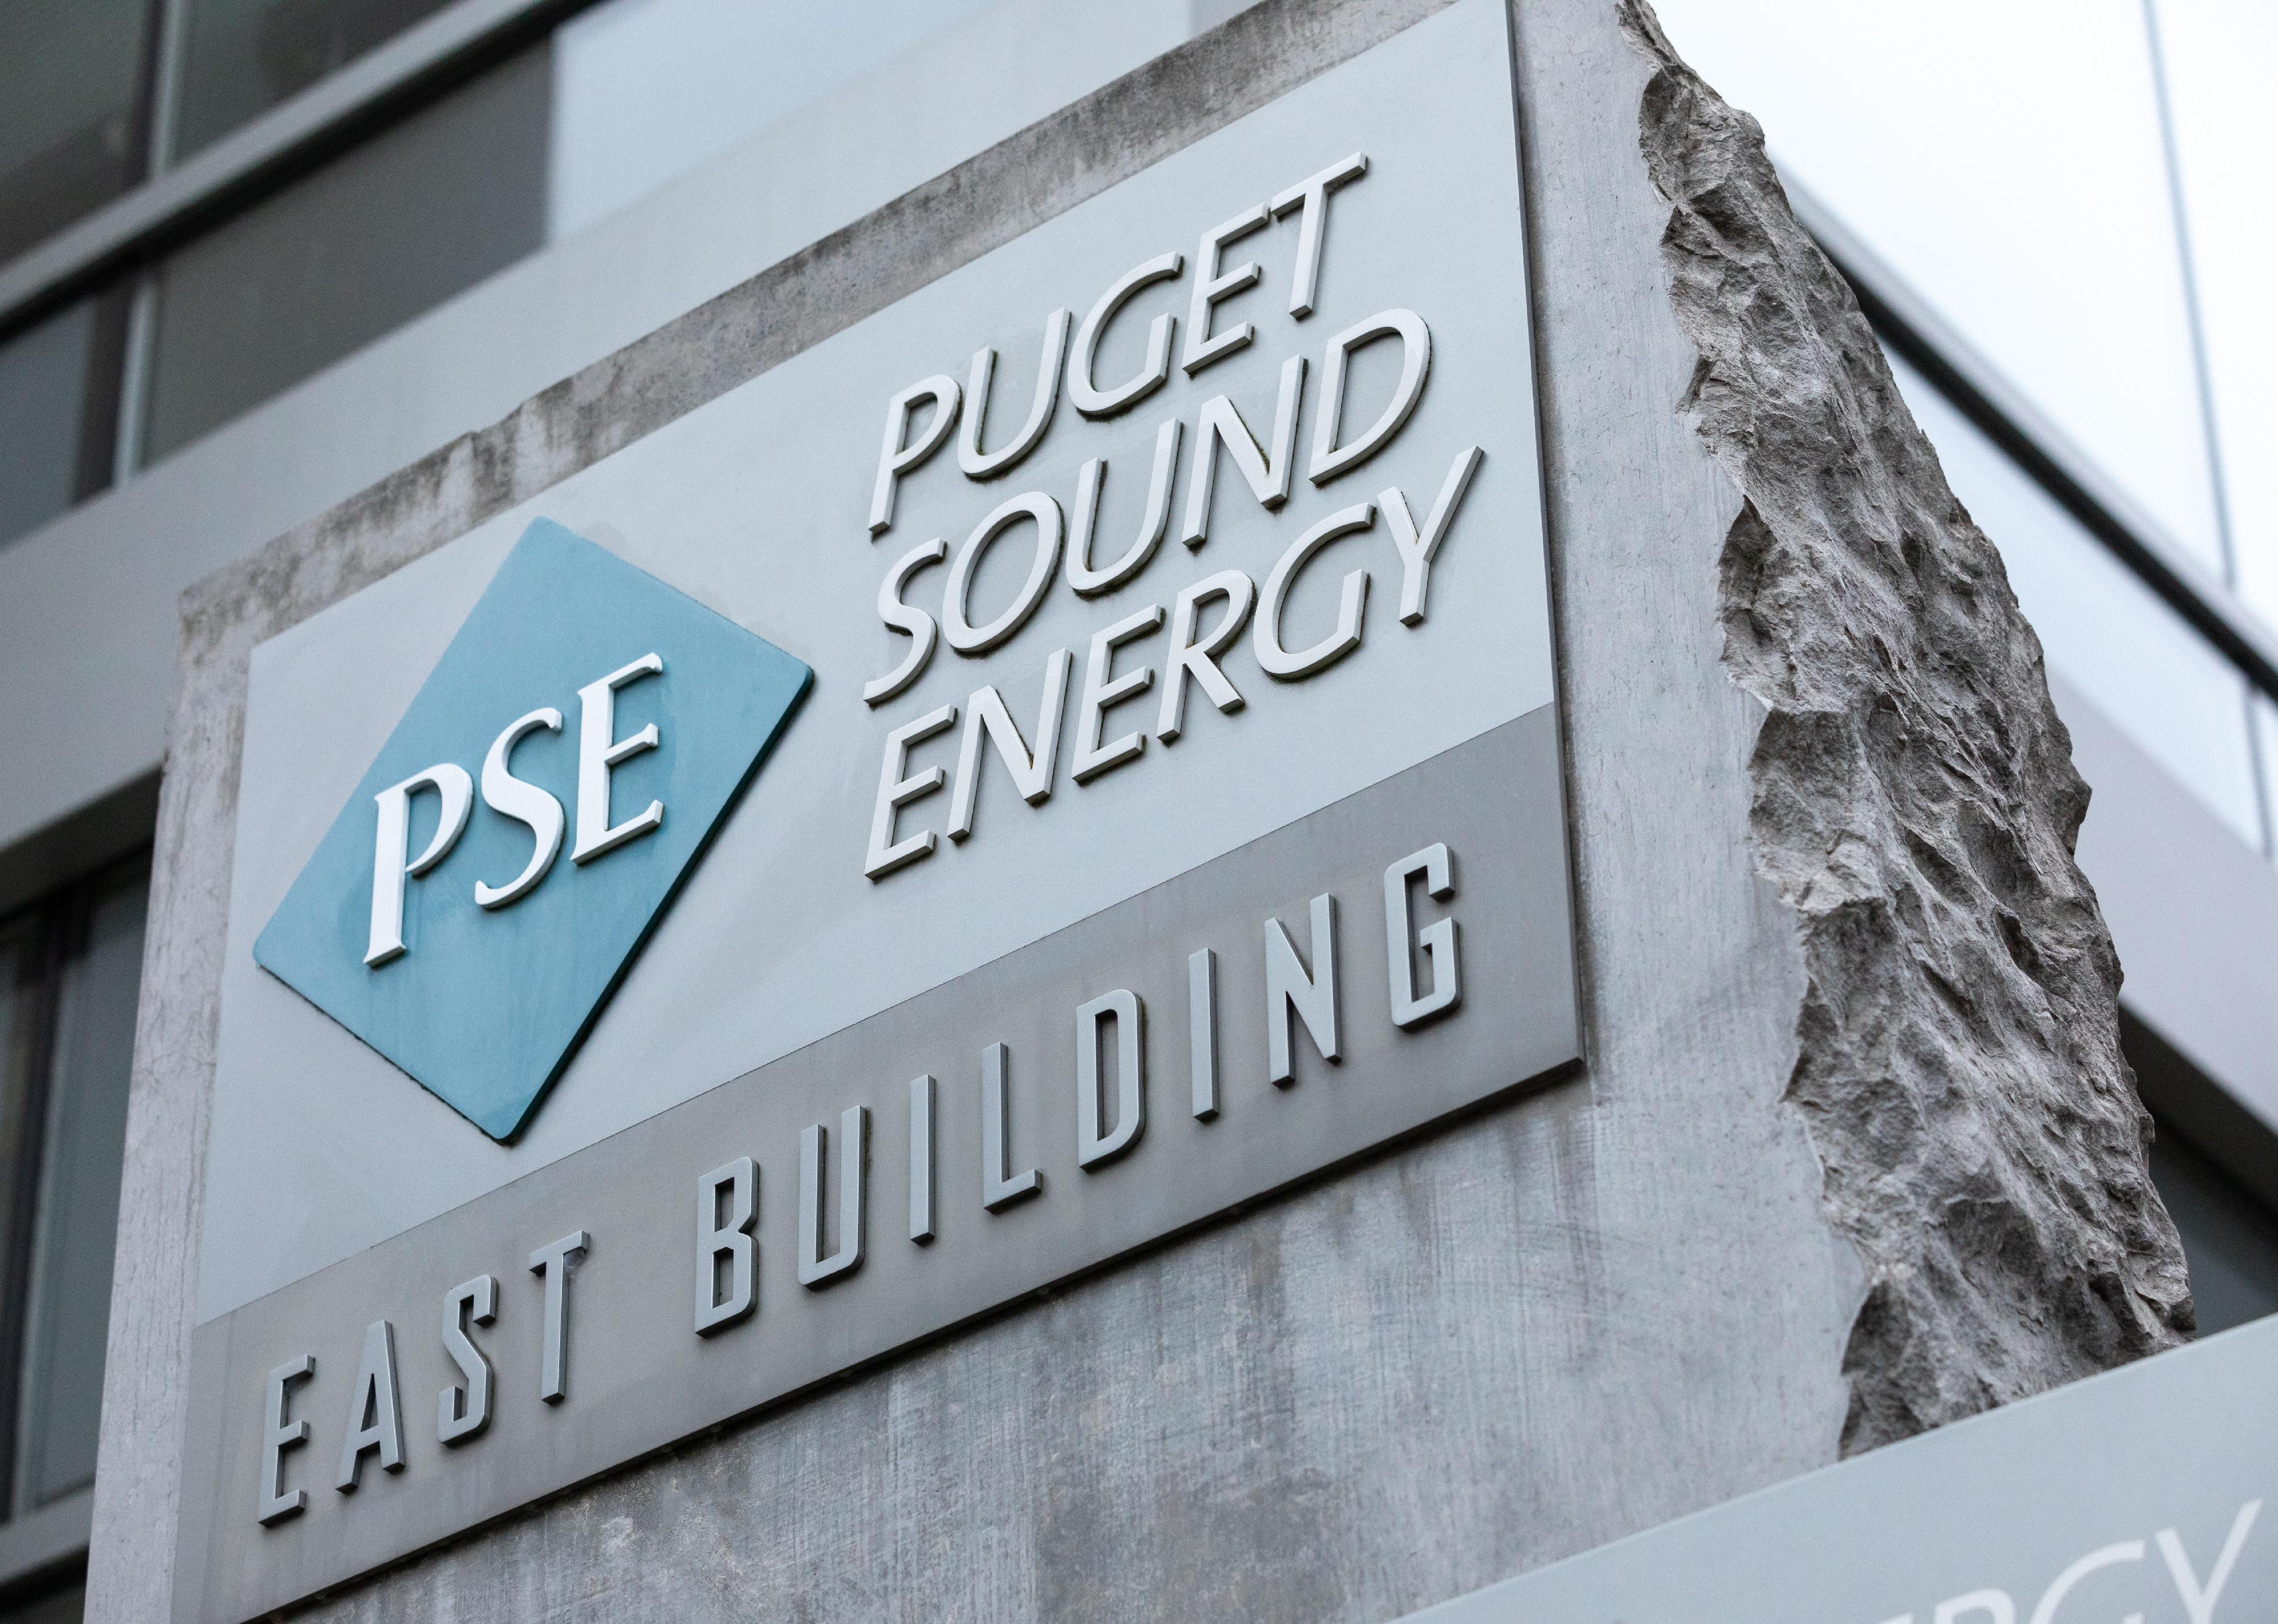 Puget Sound Energy sign at the natural gas and electricity utility offices.